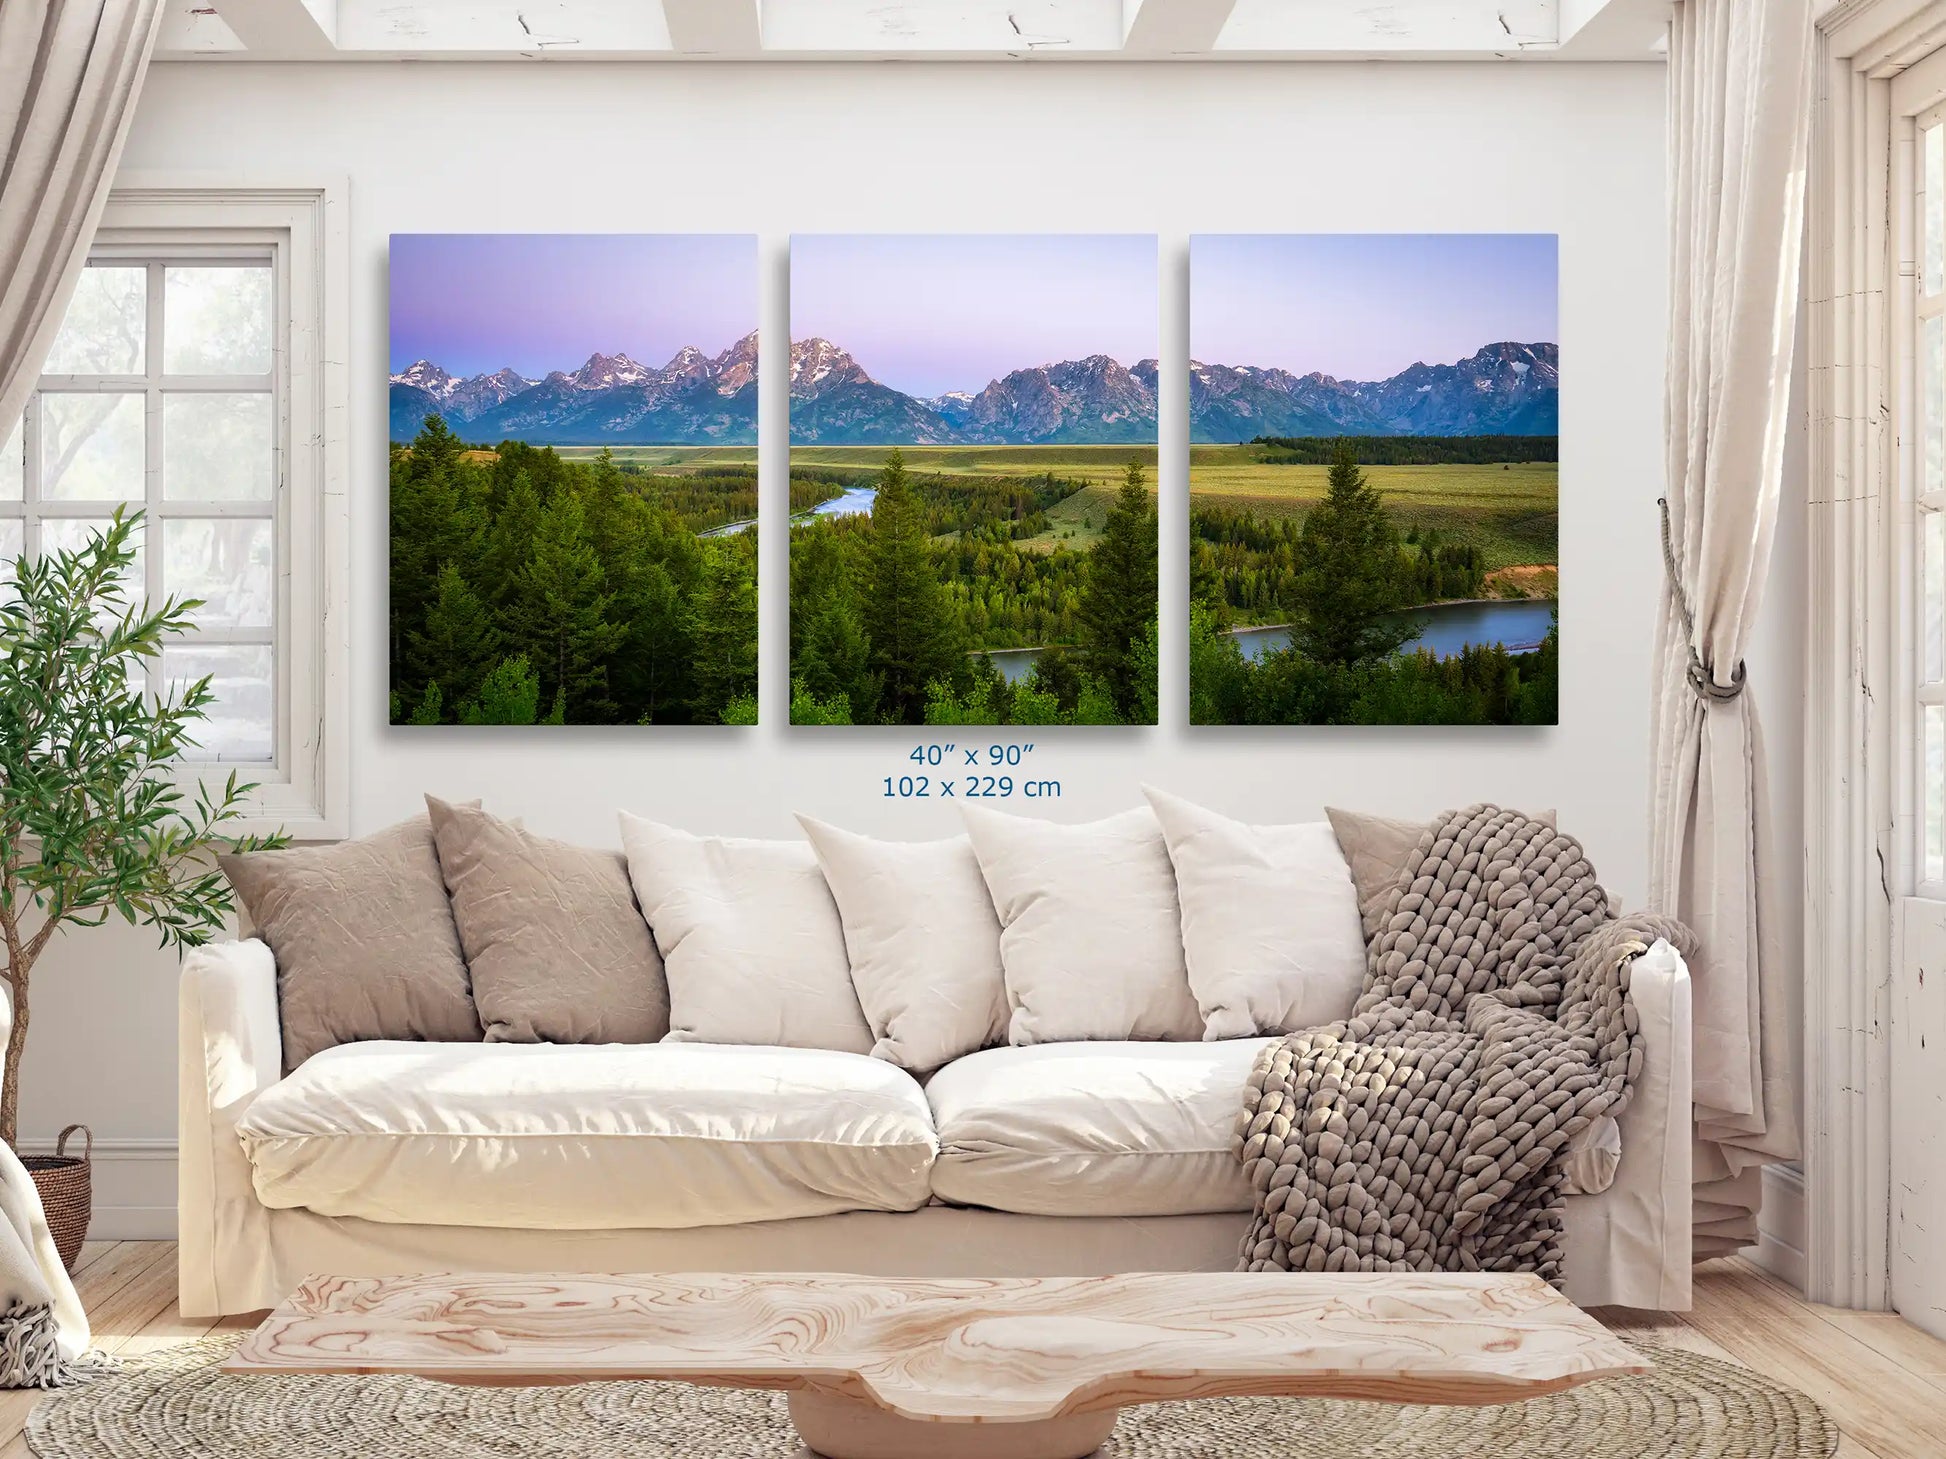 An expansive 40x90 inch canvas print of Grand Teton Mountains across the wall in a bright living space.